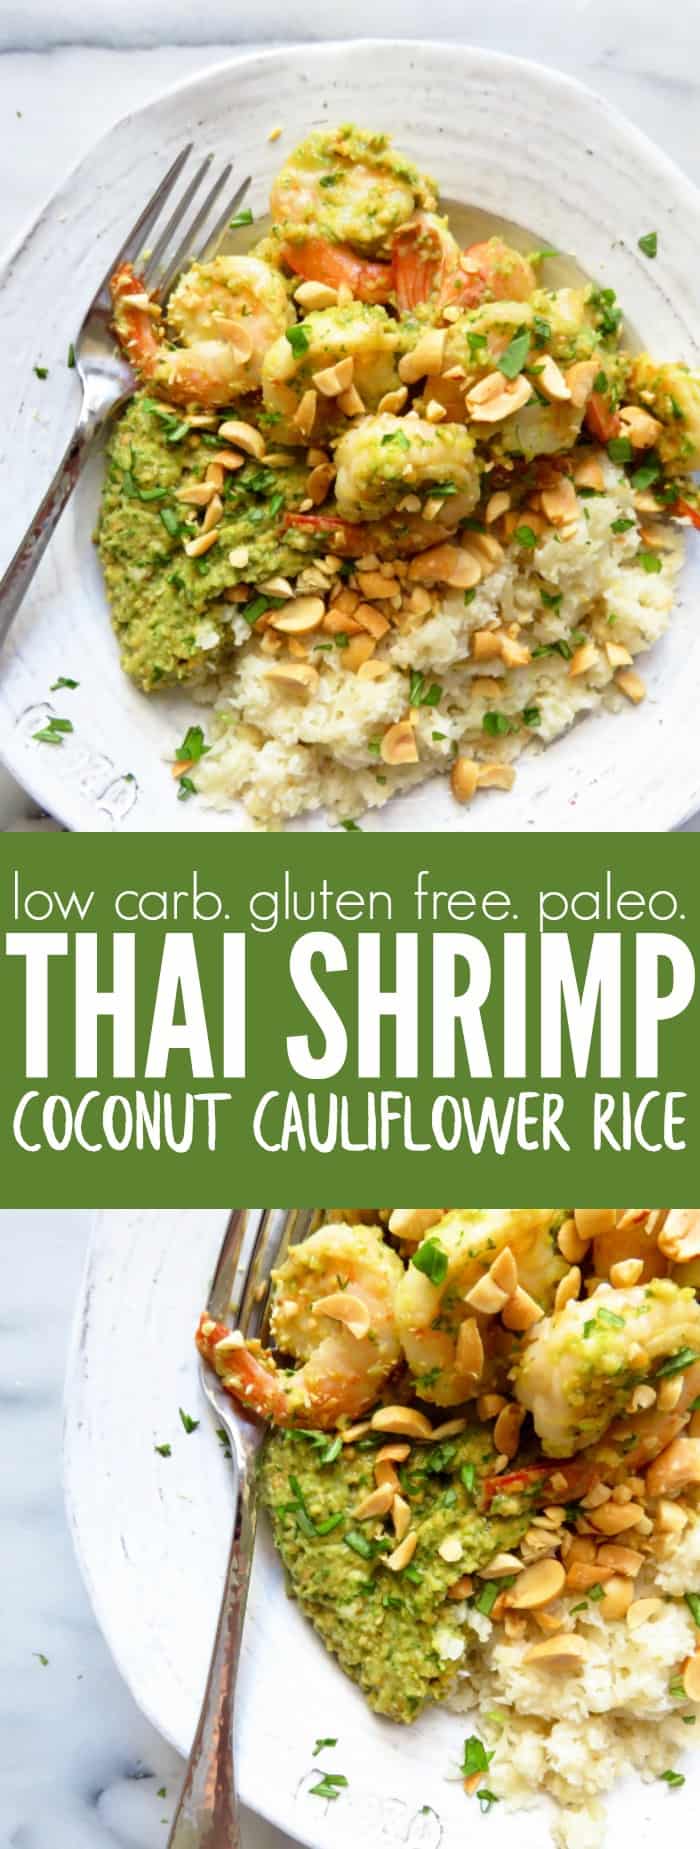 OBSESSED with this recipe for Thai Shrimp with Coconut Cauli Rice! It makes such a delicious low carb, gluten free, and paleo weeknight meal! thetoastedpinenut.com #lowcarb #glutenfree #paleo